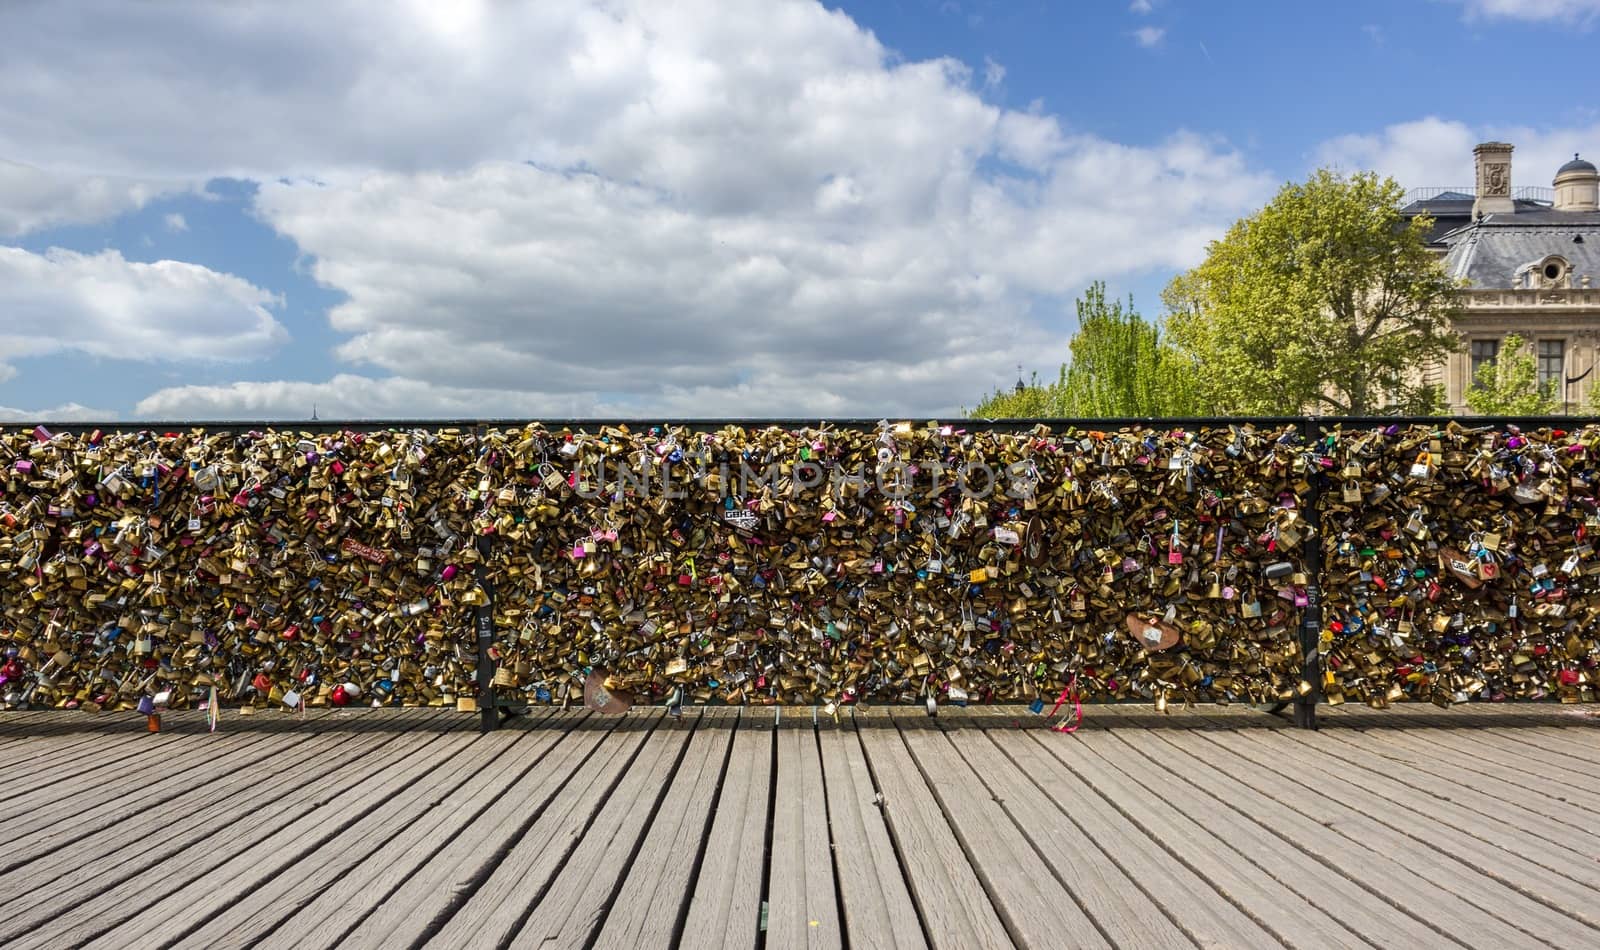 The bridge of arts has become the symbol of lovers who leave a padlock symbol of their bond